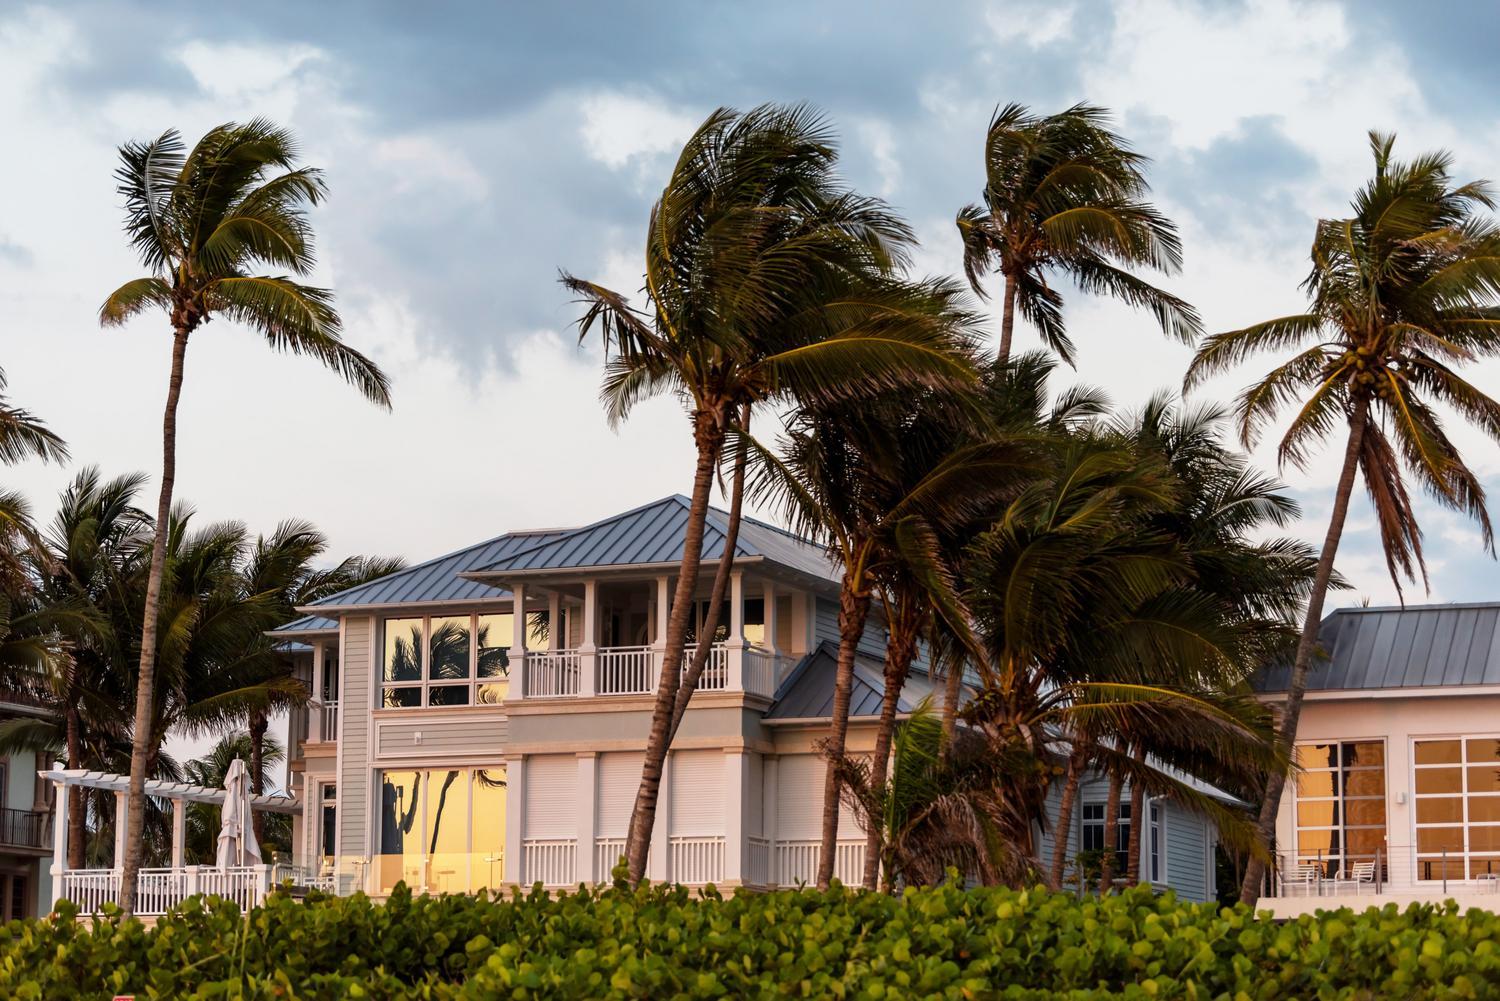 Coast house beachfront waterfront vacation home, house during evening sunset with nobody in Florida, gulf of mexico, storm weather and wind palm trees